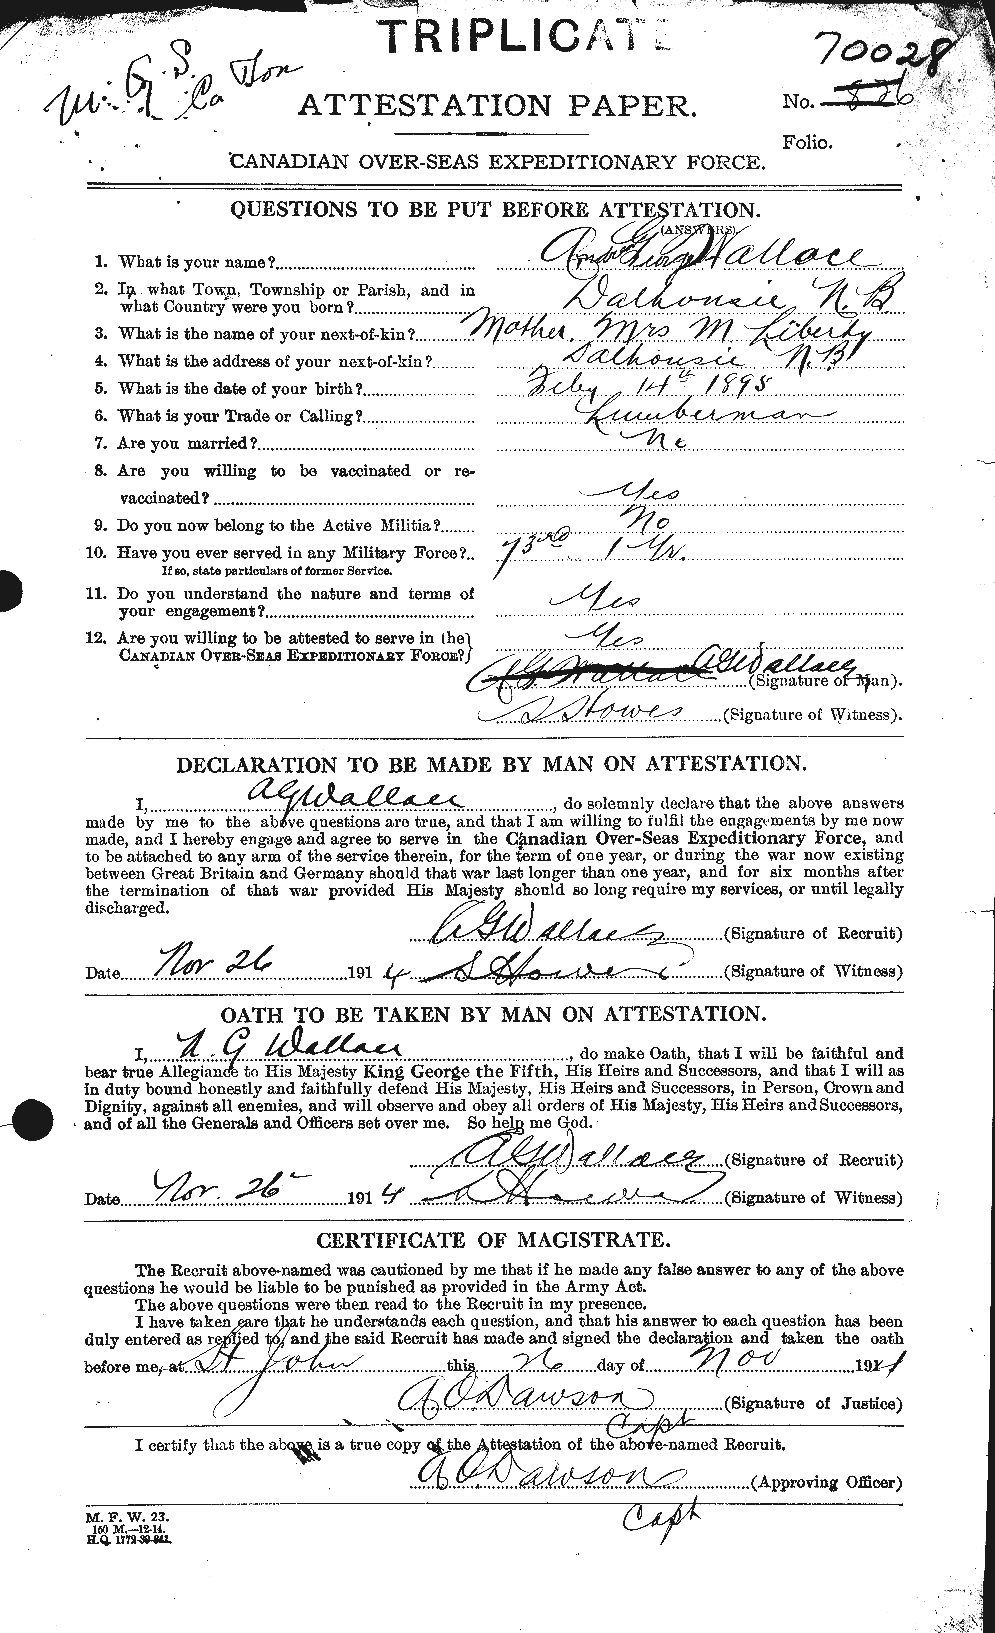 Personnel Records of the First World War - CEF 650326a